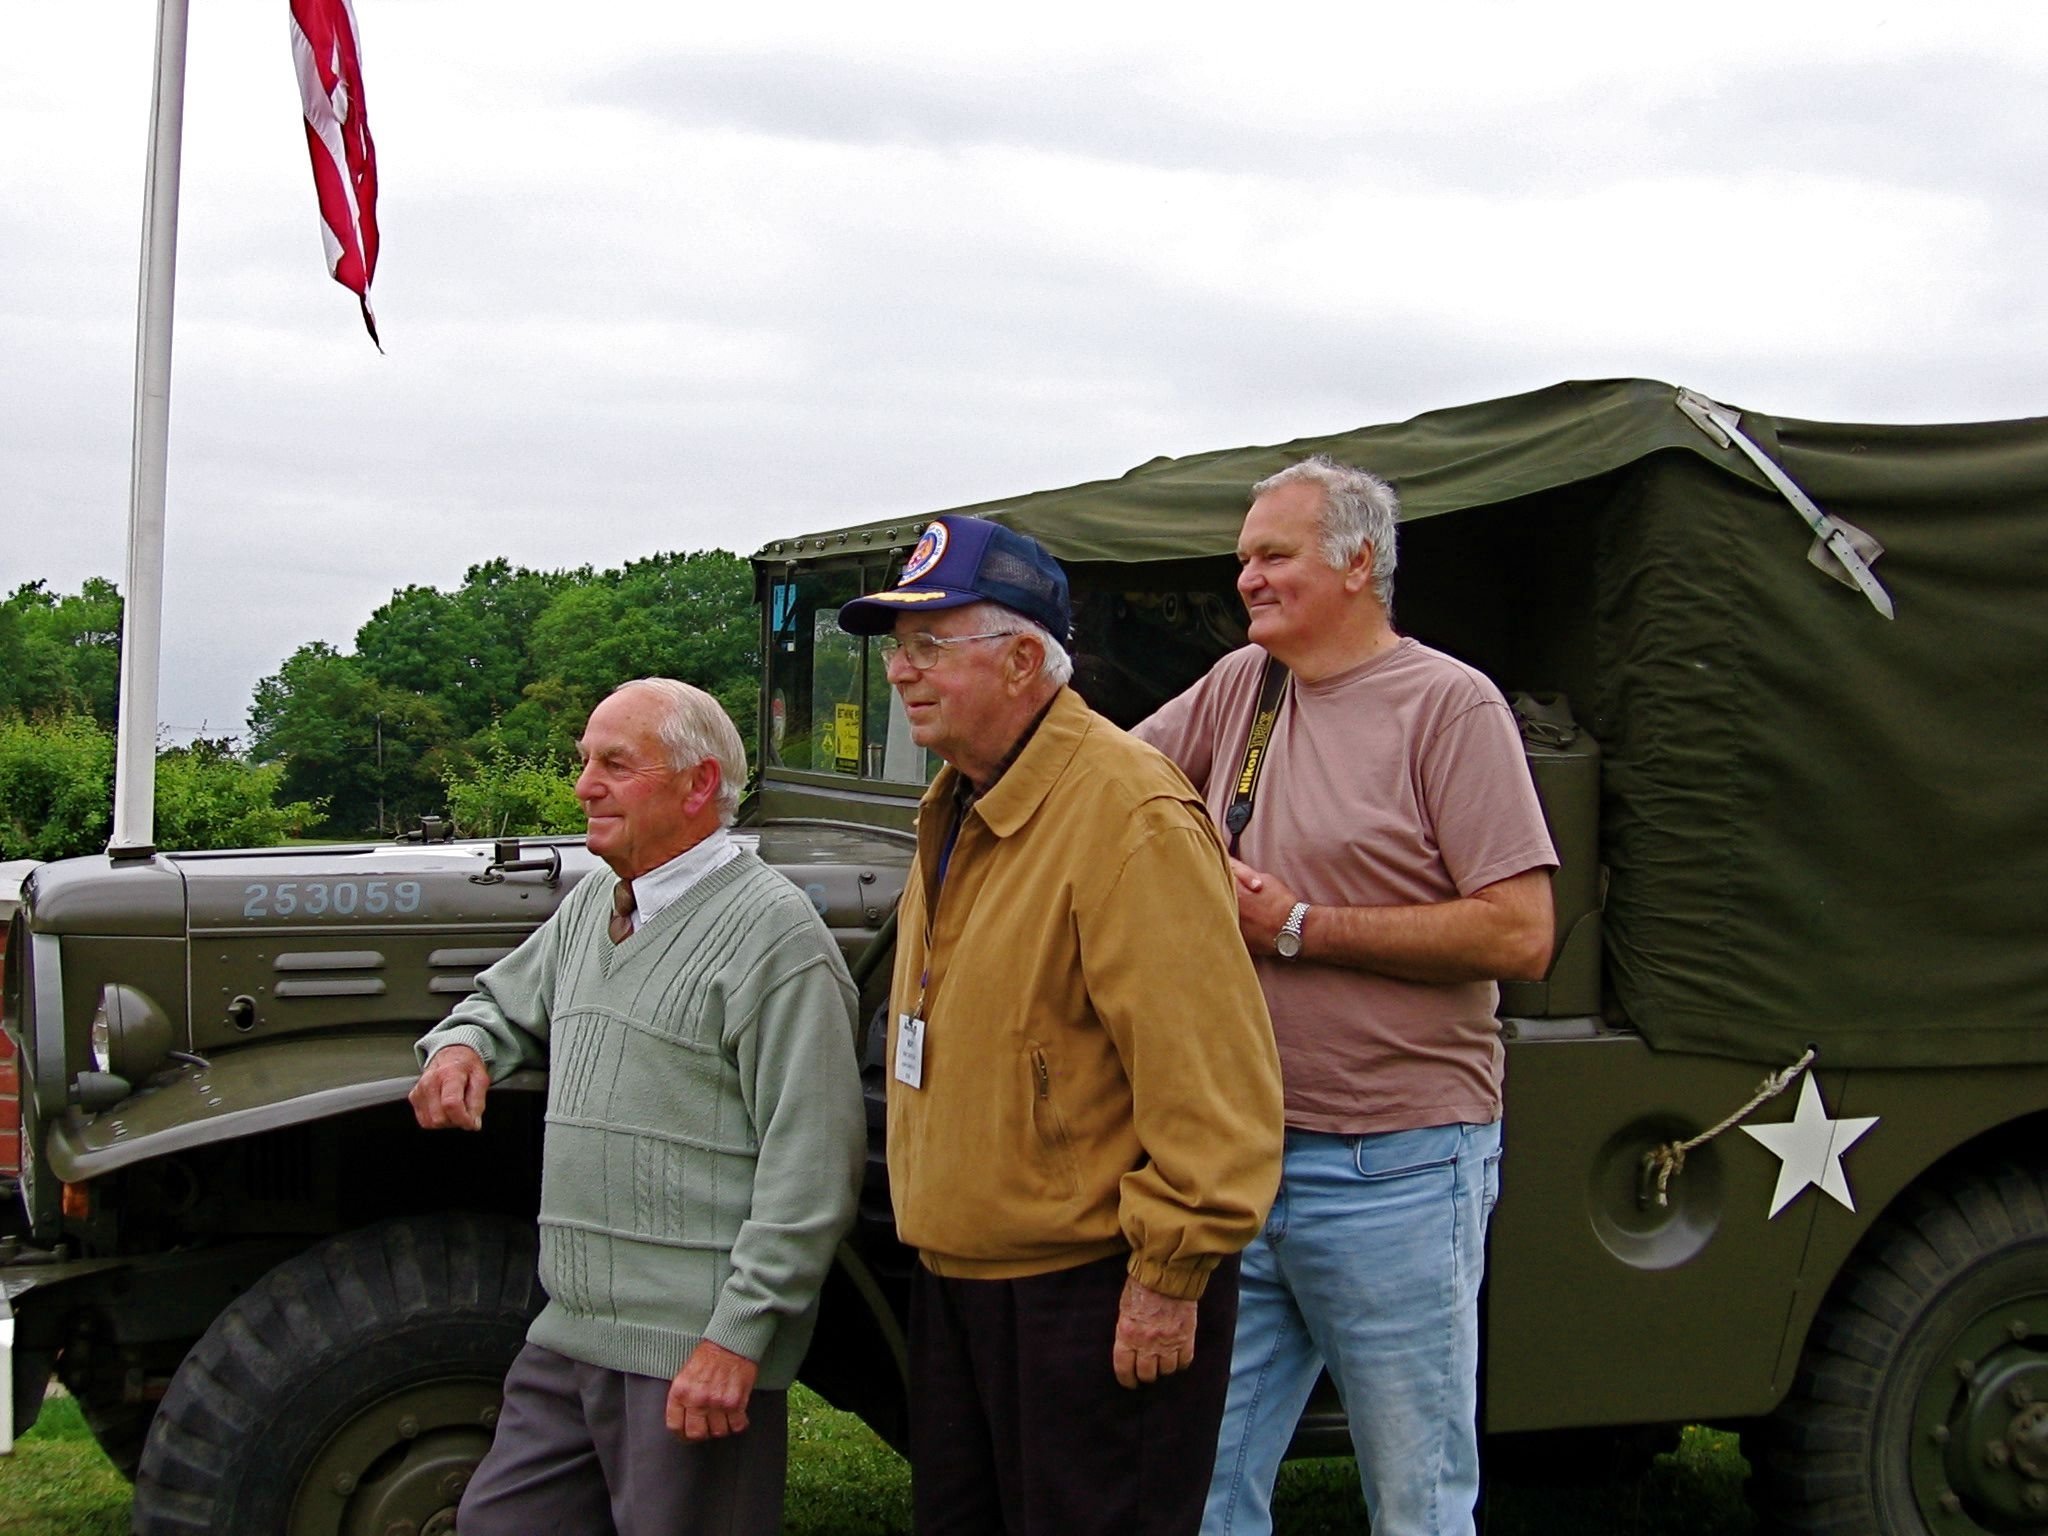 Ray with Alan Johnson and Norm Feltwell, Horham UK, 2011